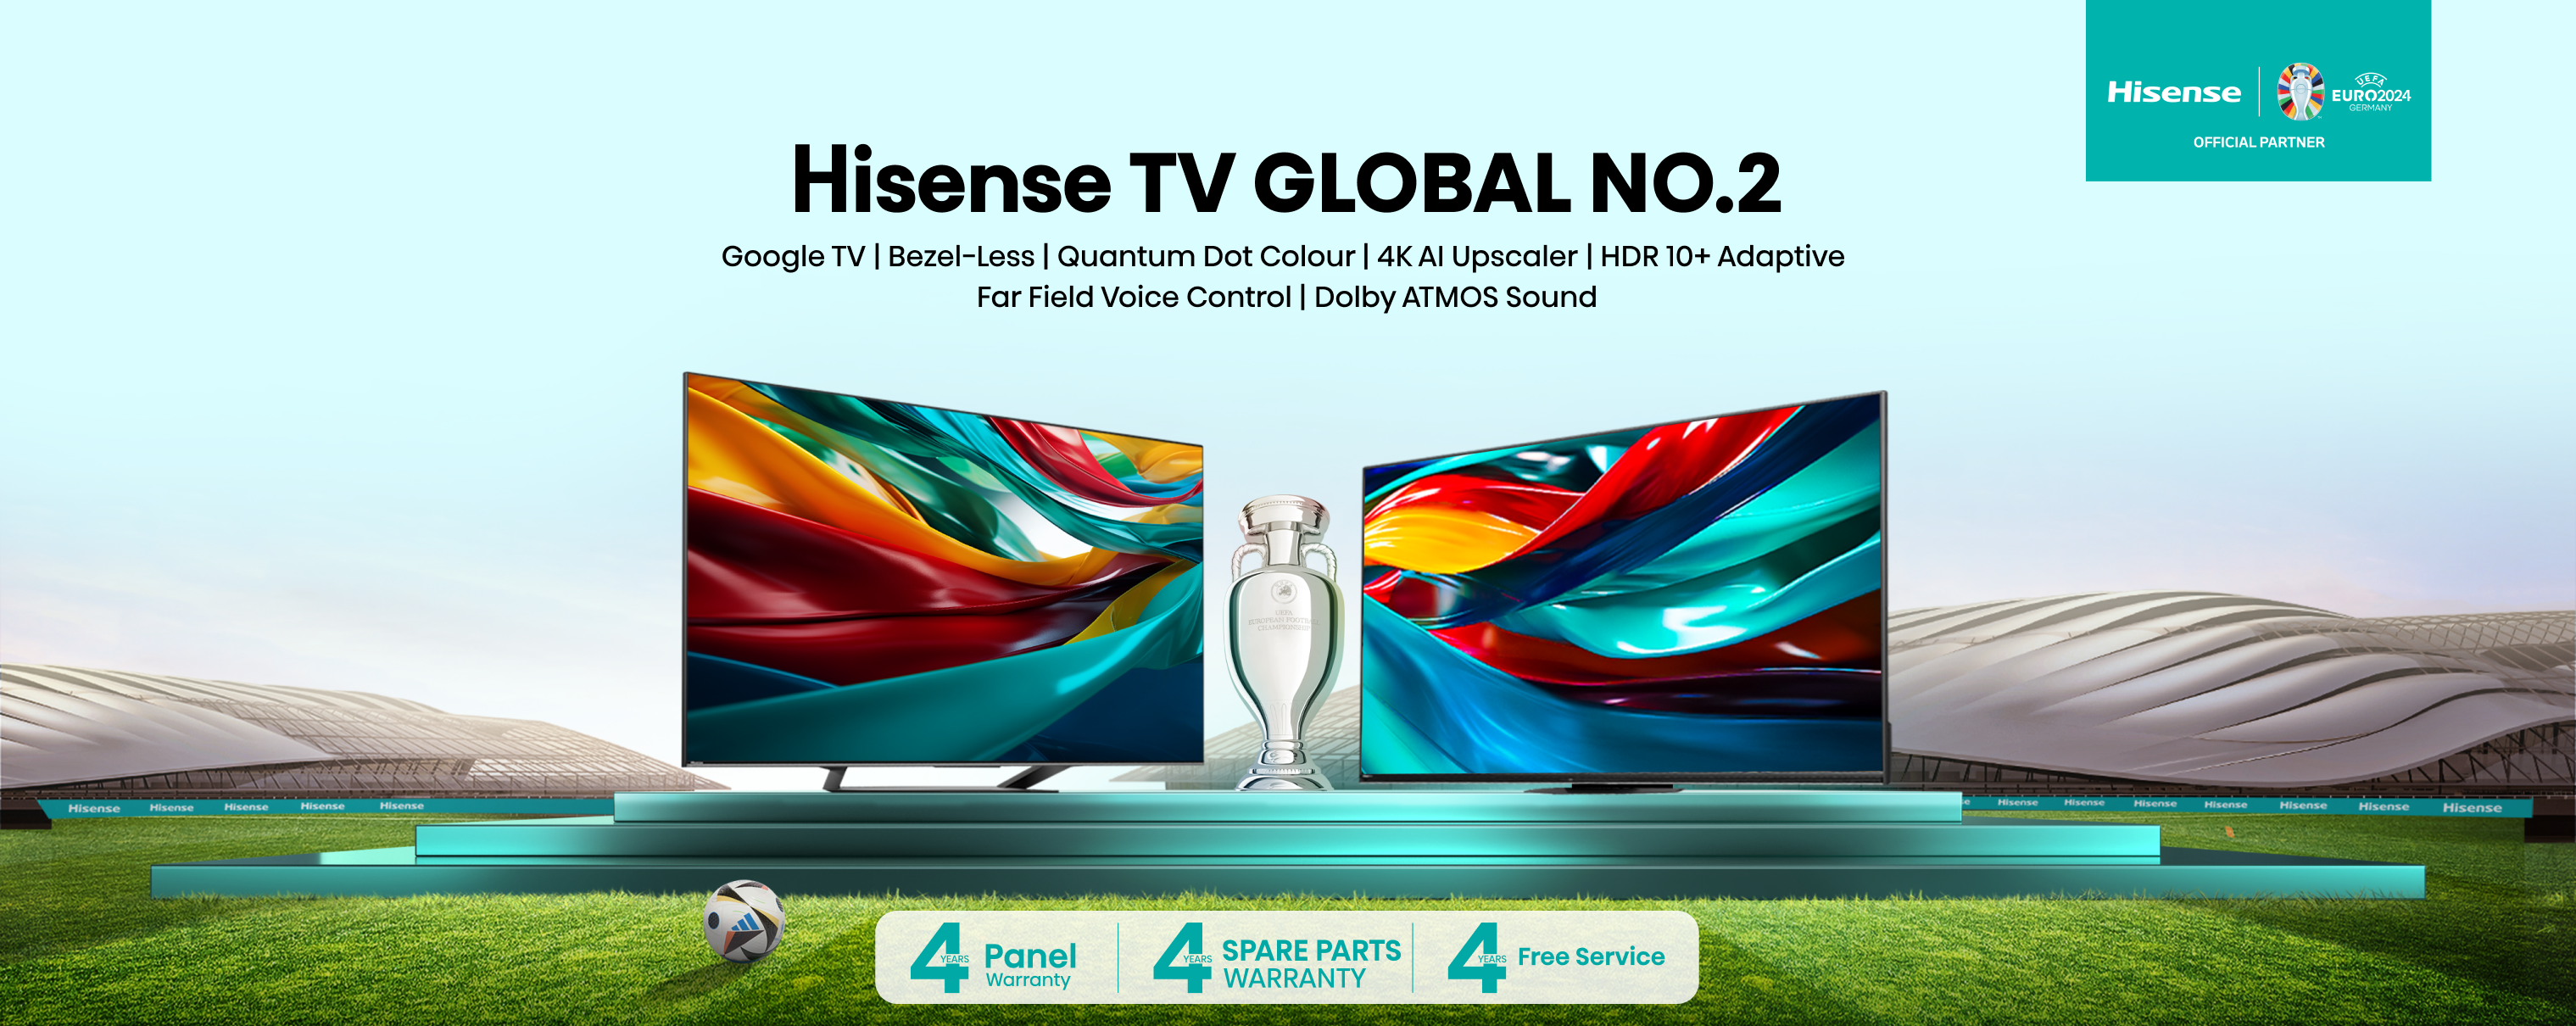 Hisense Smart TV is a line of televisions manufactured by one of the best global TV brand Hisense. Hisense TV has variety of series like, ULED 4K TV, UHD 4K TV and FHD TV with crystal-clear picture quality and a seamlessly access a world of Google TV which brings limitless entertainment possibilities. Hisense Google TVs also have advances features like, bezel-less display, quantum dot color technology, 4K AI upscaling, HDR 10+ adaptive support, far field voice control with remote and Dolby ATMOS sound system for best sound performance. Hisense Smart TVs offering 4 years warranty, which includes Panel, spare parts and free services, to giving the best viewing experience and discover the future smart TV with Hisense and Google. Hisense is the best android smart TV with affordable price in Bangladesh. Fair Electronics is the manufacturer of Hisense TV in Bangladesh.